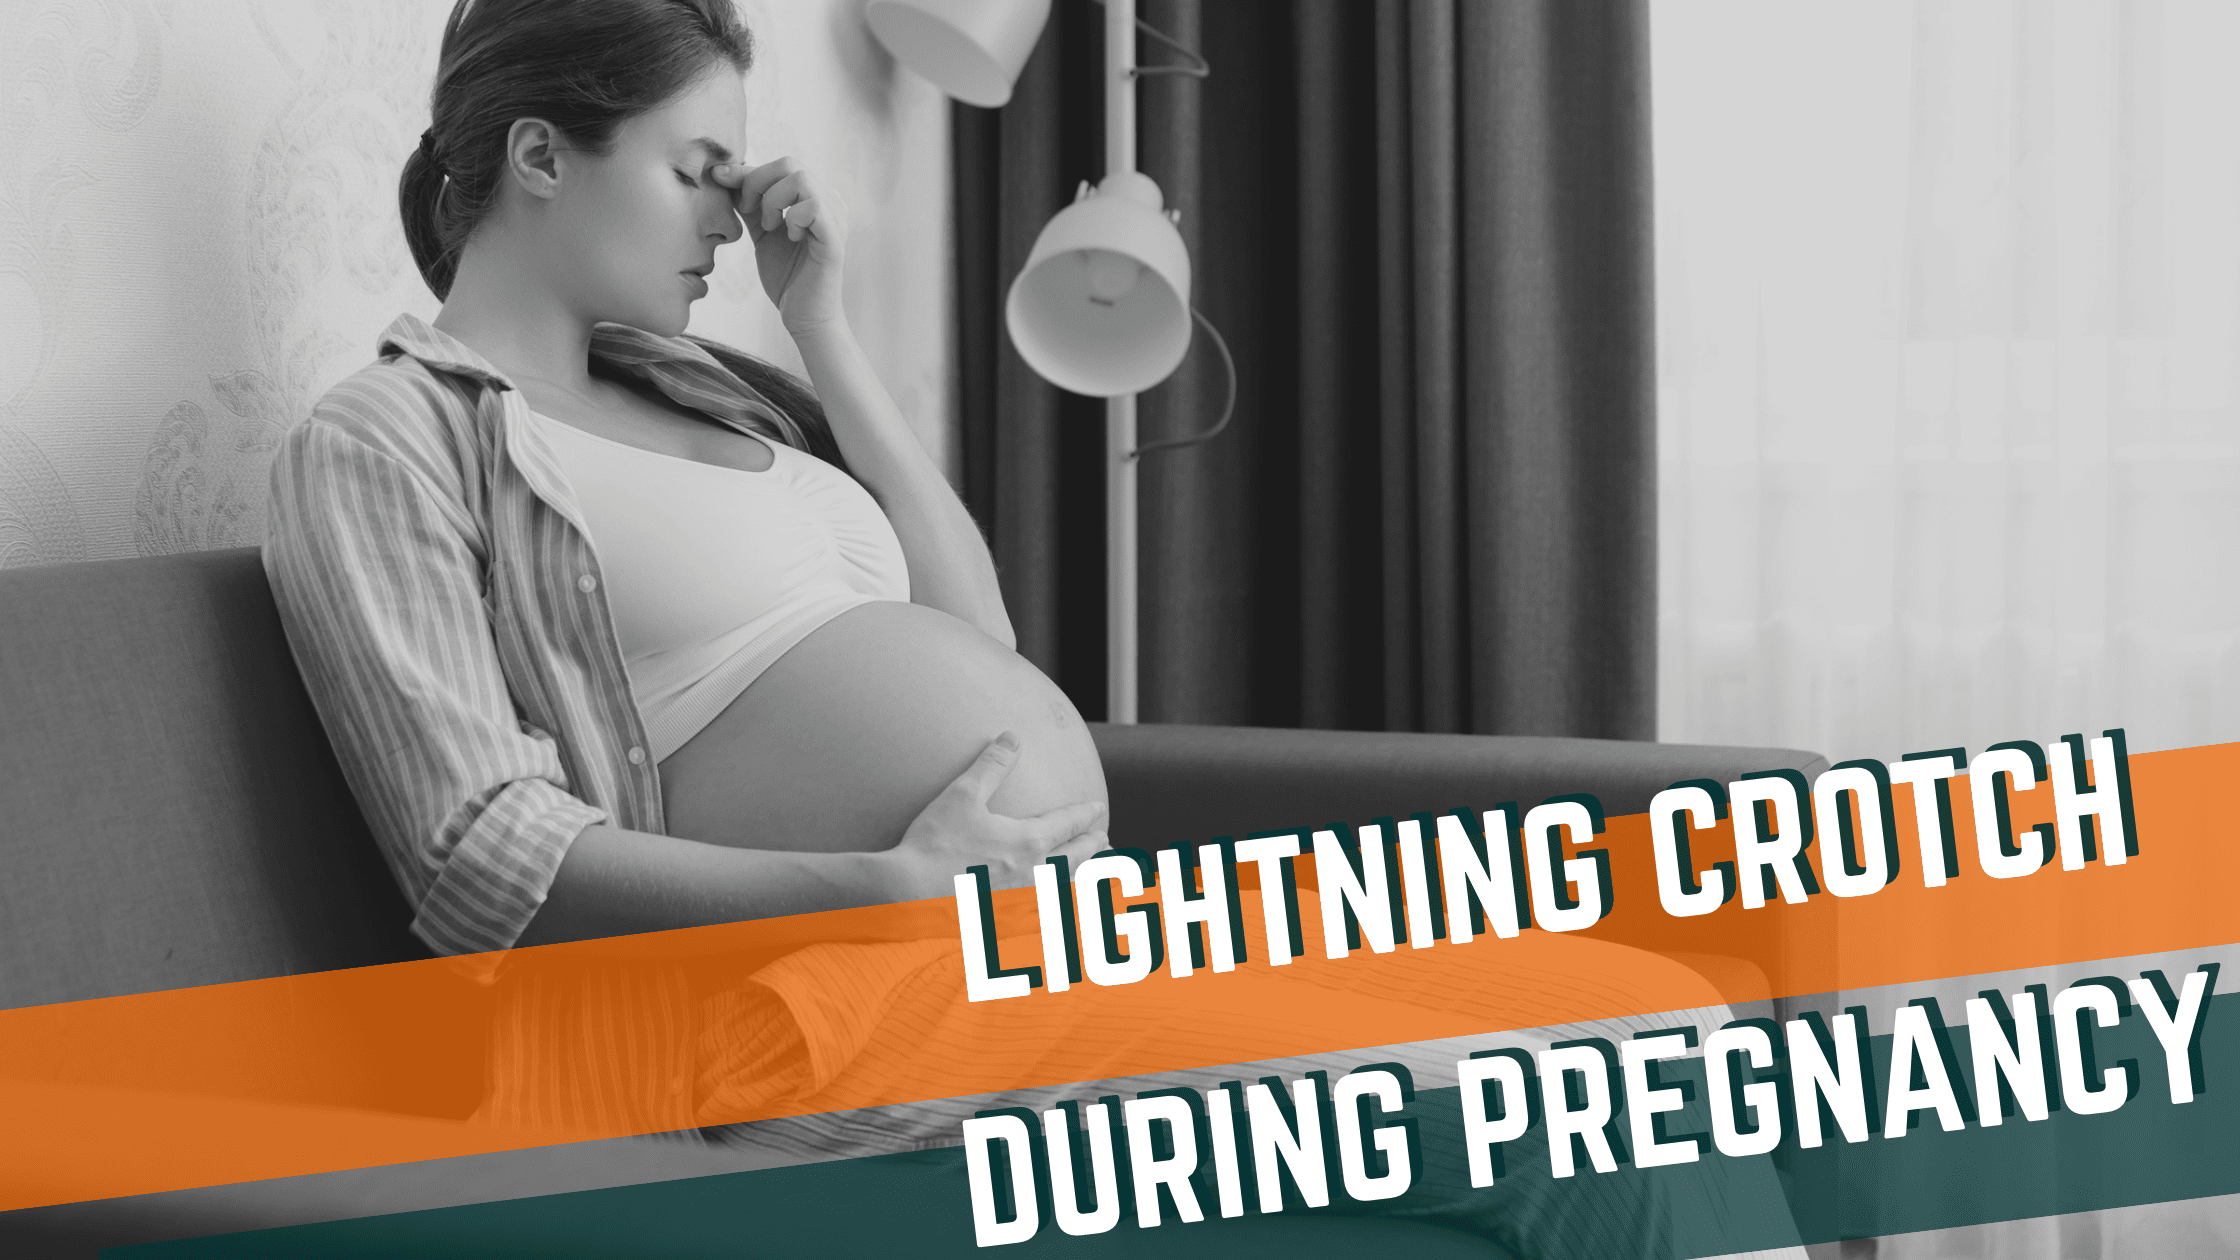 Featured image for “Lightning Crotch During Pregnancy?”